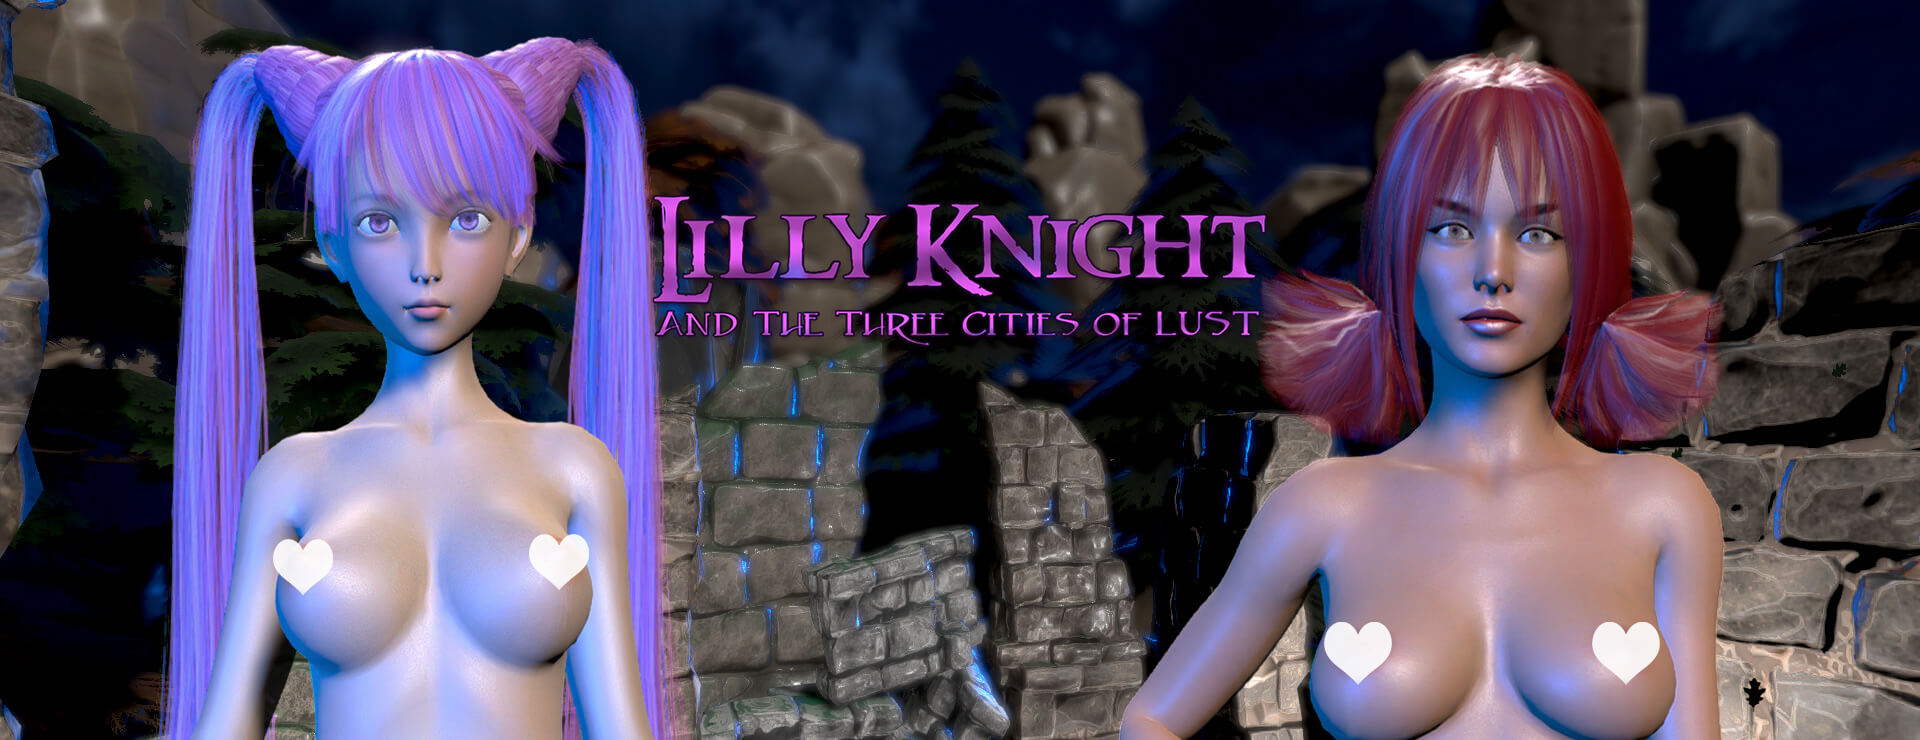 Lilly Knight and the Three Cities of Lust - 动作冒险游戏 遊戲